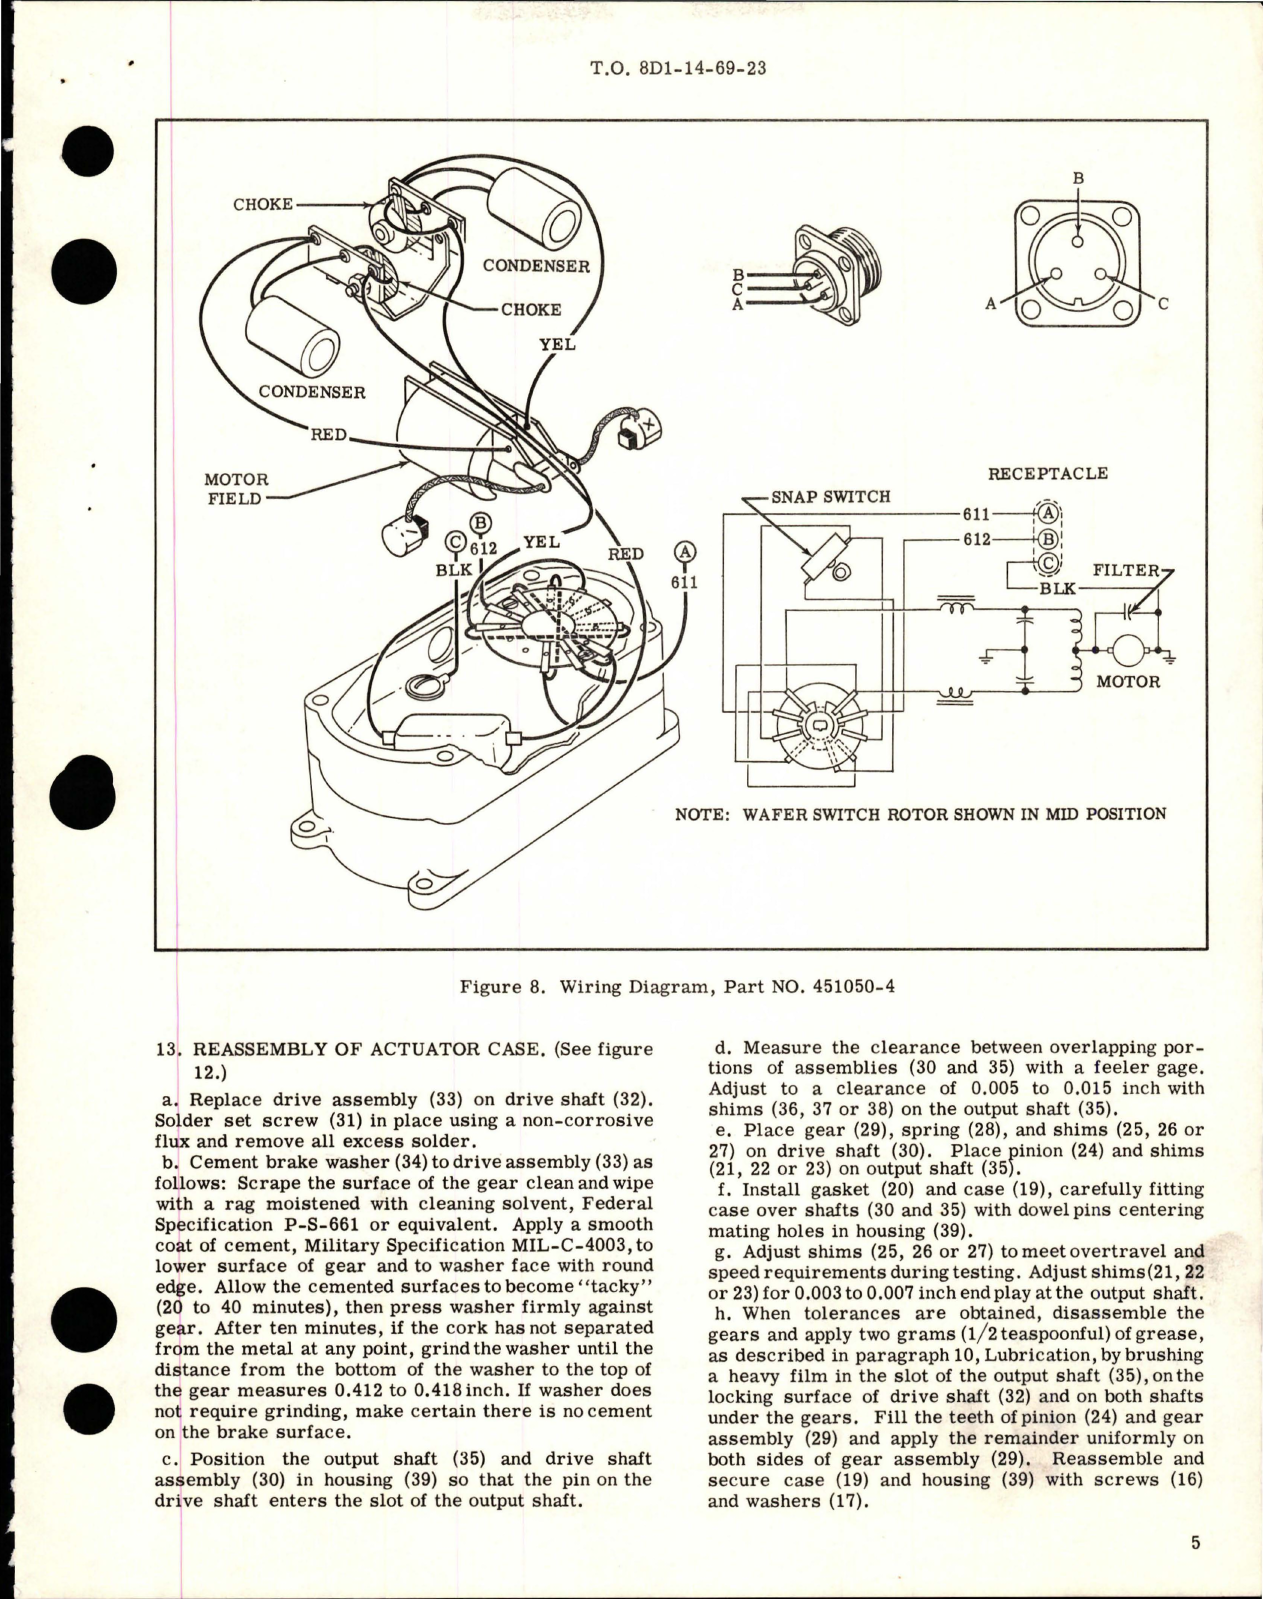 Sample page 5 from AirCorps Library document: Overhaul with Parts Breakdown for Geneva-Loc Actuator - Series 108 - Parts 451050 and 451050-4 